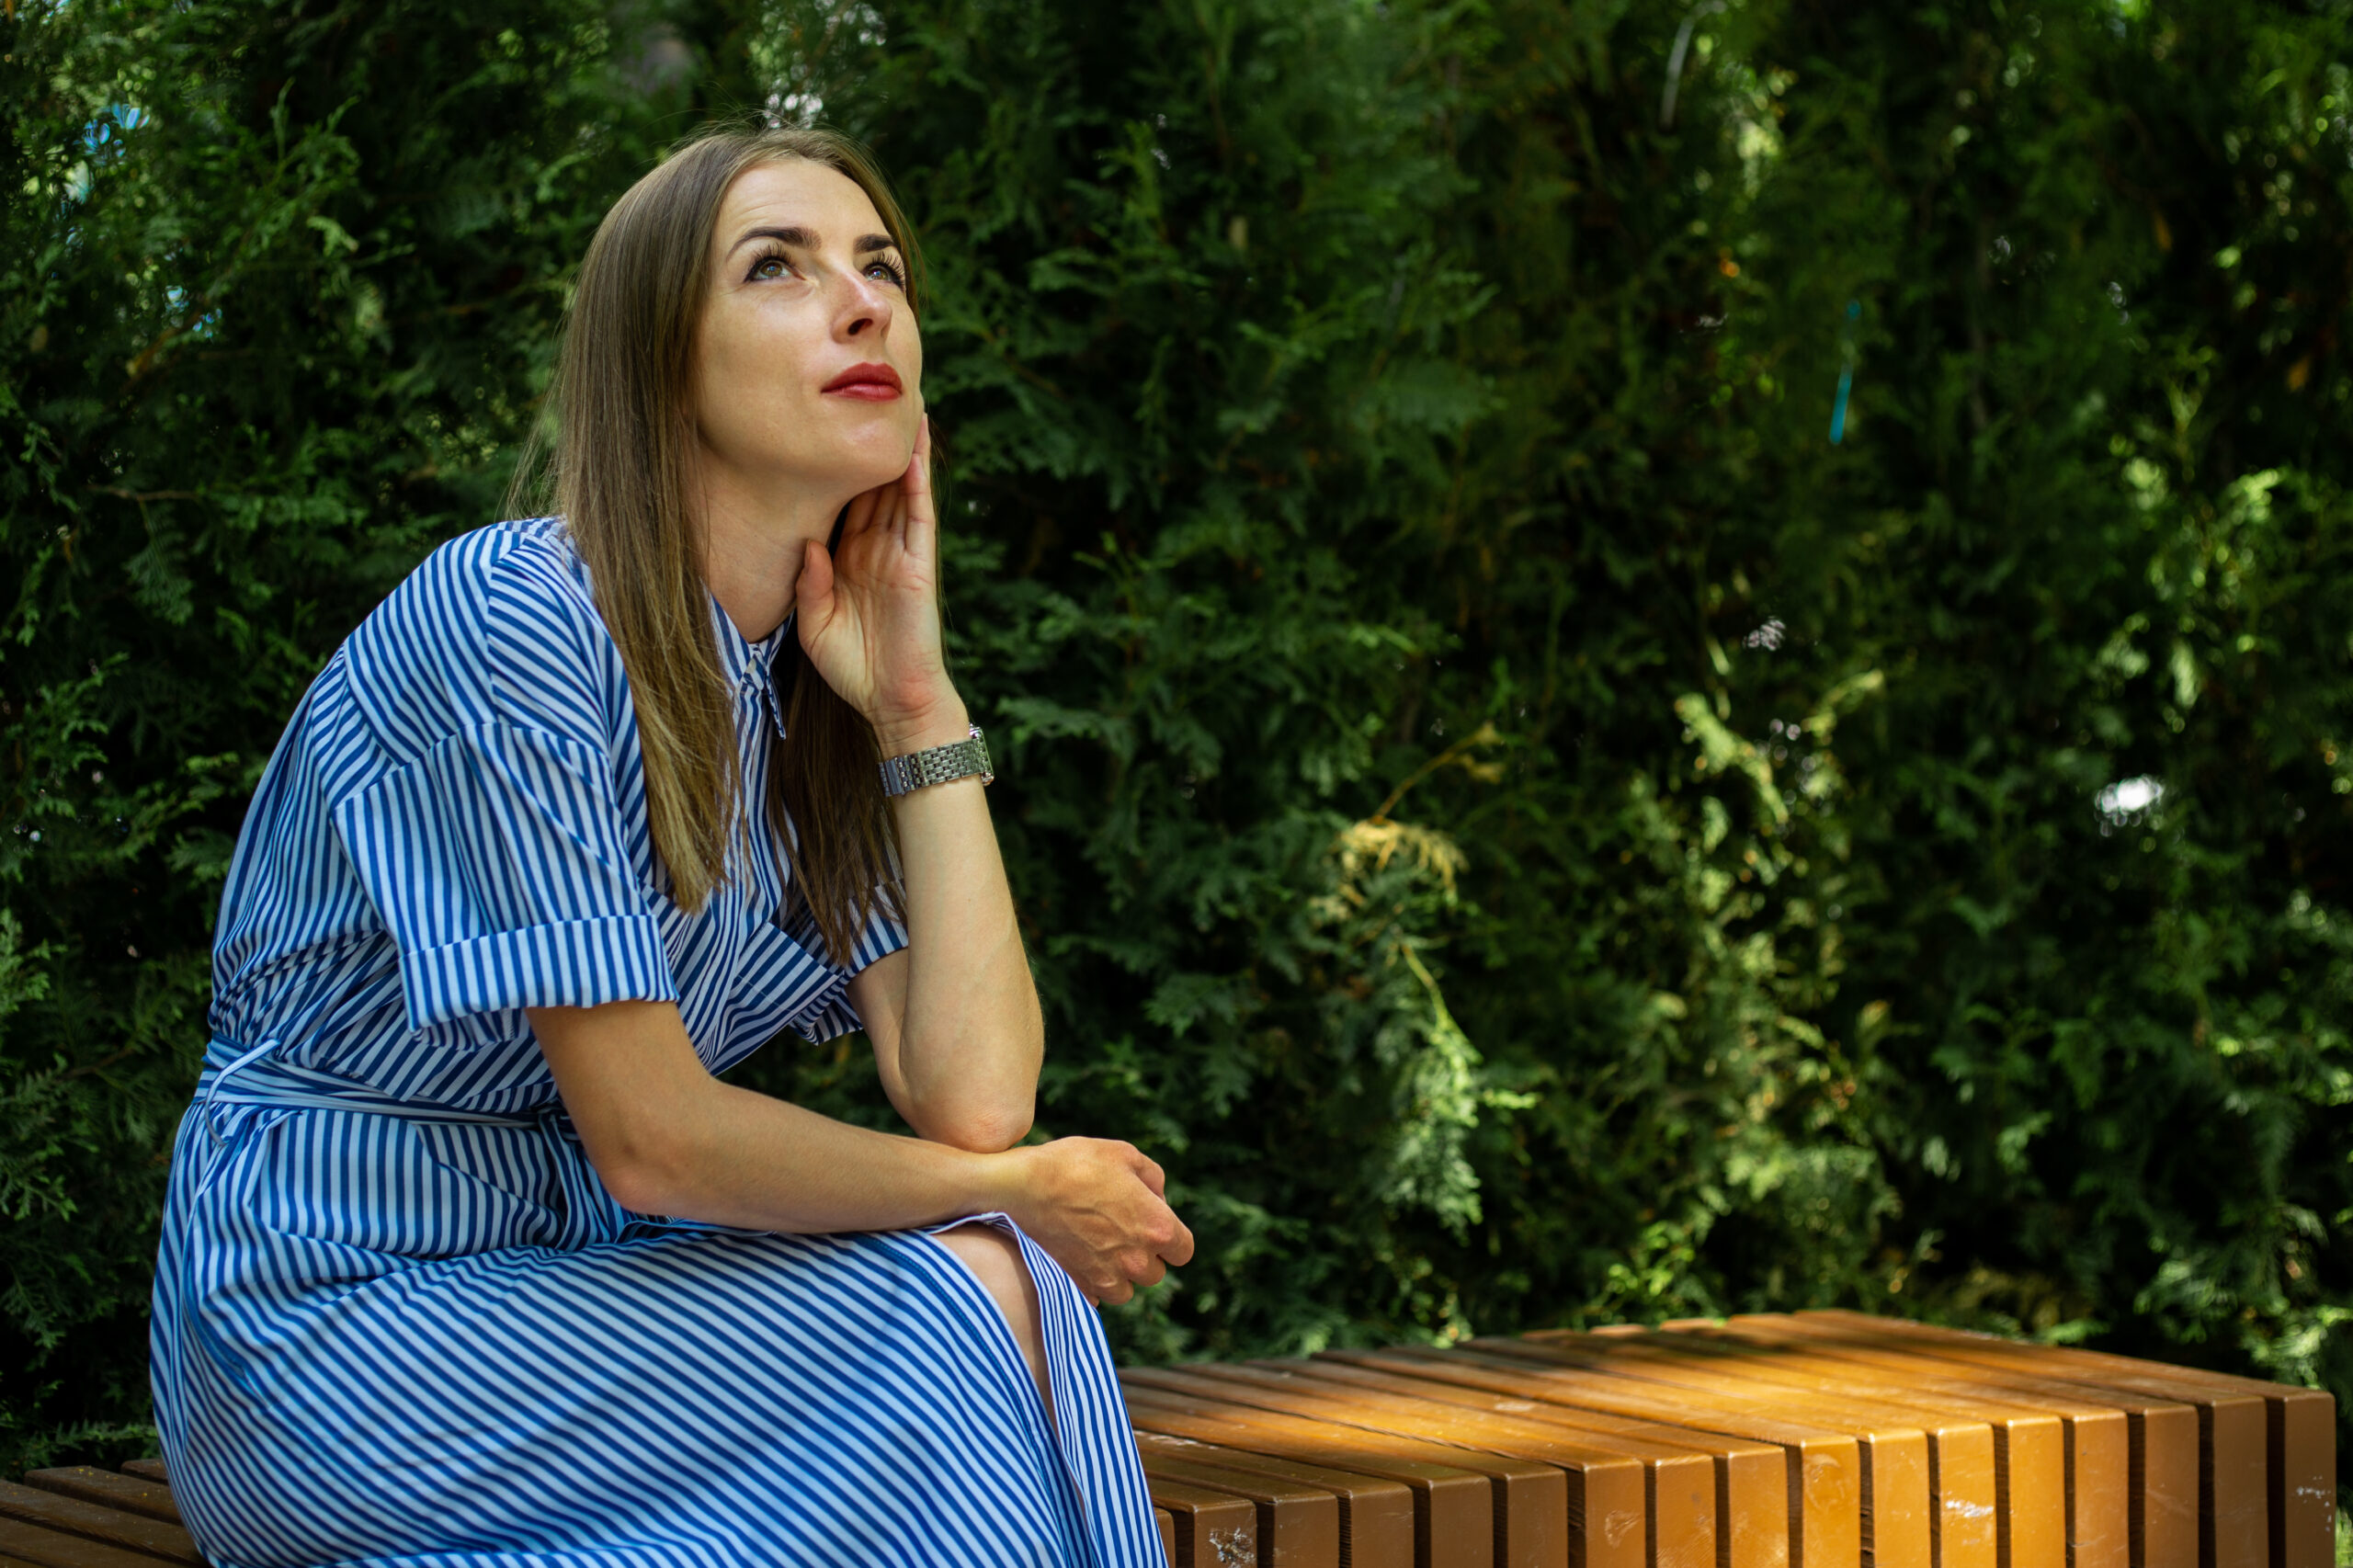 A woman in a blue and white striped dress sitting on a park bench, looking thoughtfully upwards with her hand on her cheek, surrounded by lush greenery